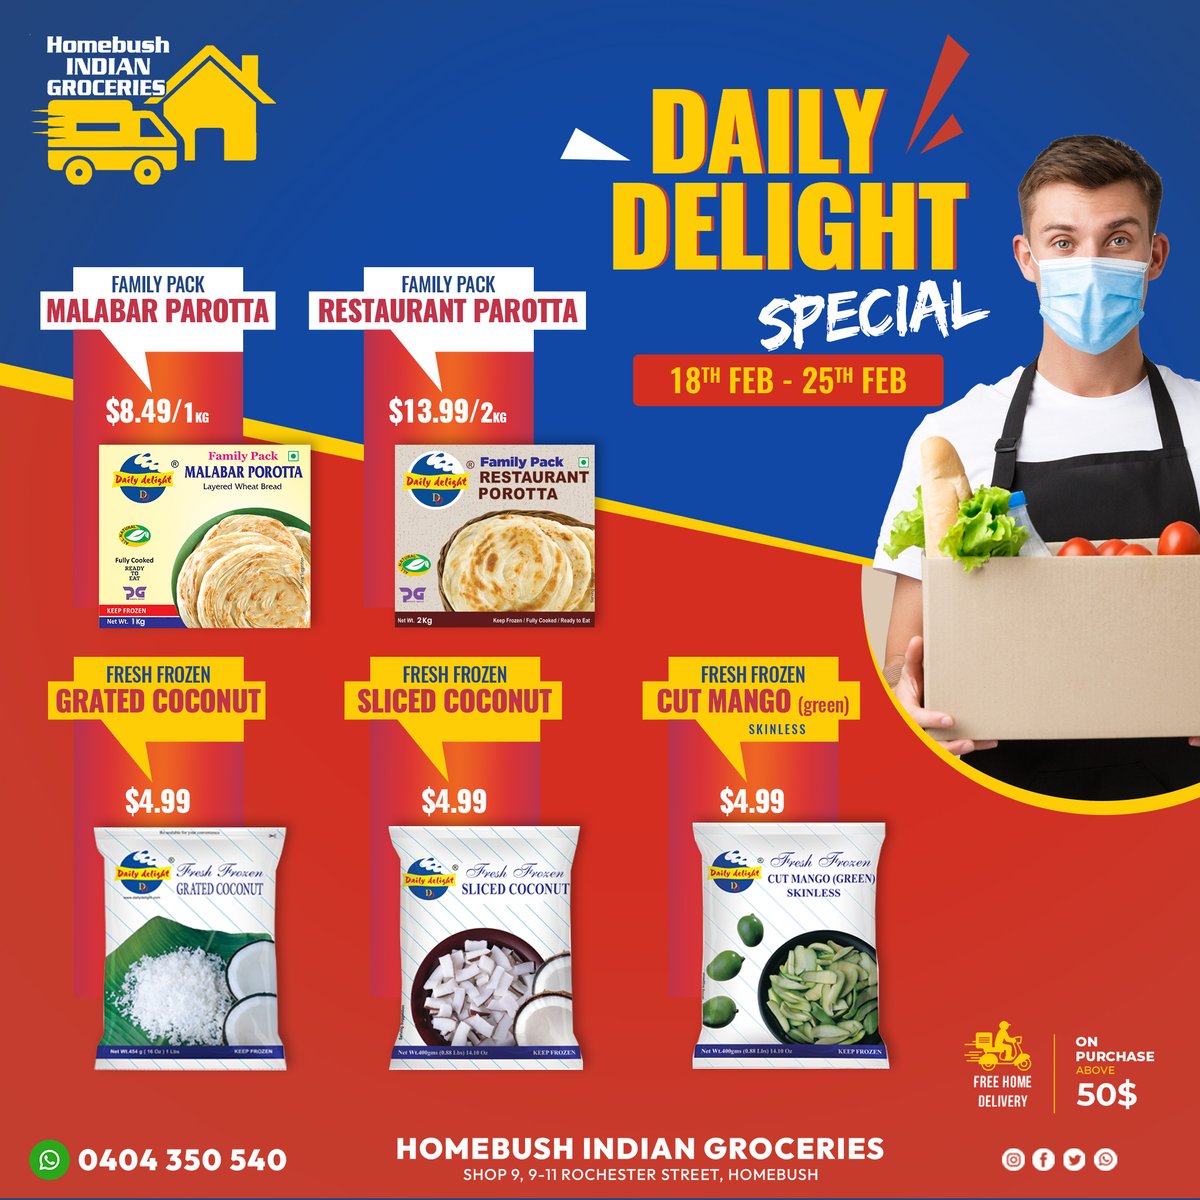 Cooking made easy with our daily use ingredients! Don't miss out on our amazing offers!

Homebush Indian Groceries
📍 Shop9,9-11 Rochester Street, Homebush, New South Wales 2140, AU
☎️ 0404 350 560
#homebush
#homebushindiangroceries #dailyessentials